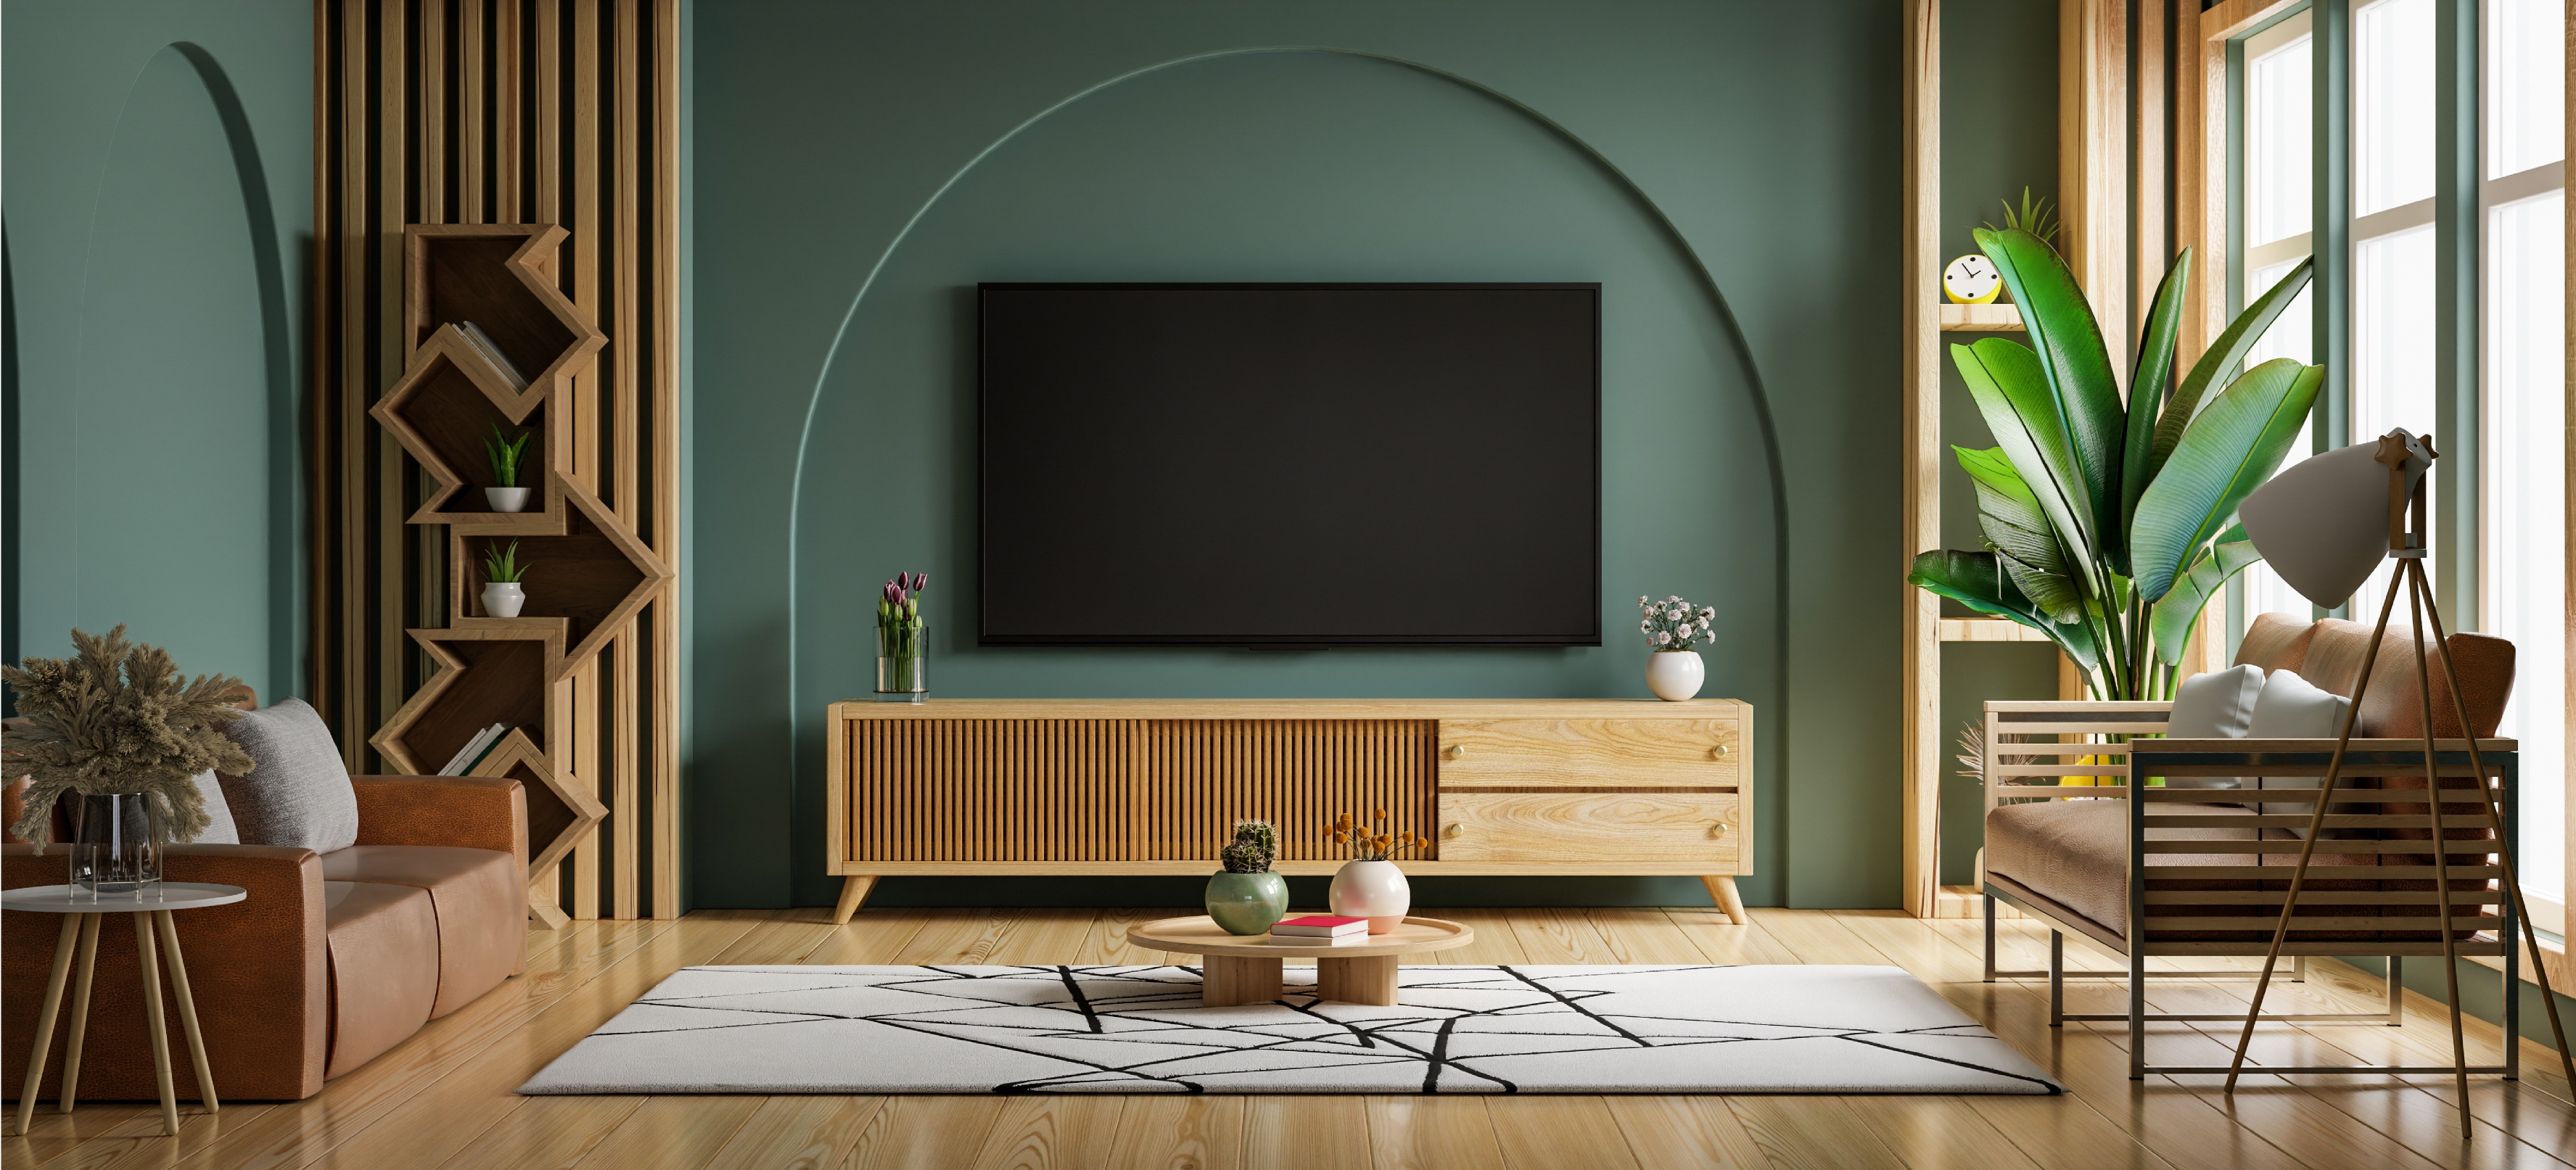 Modernizing Your Home with the Right TV Cabinet Solution - Urban Ladder